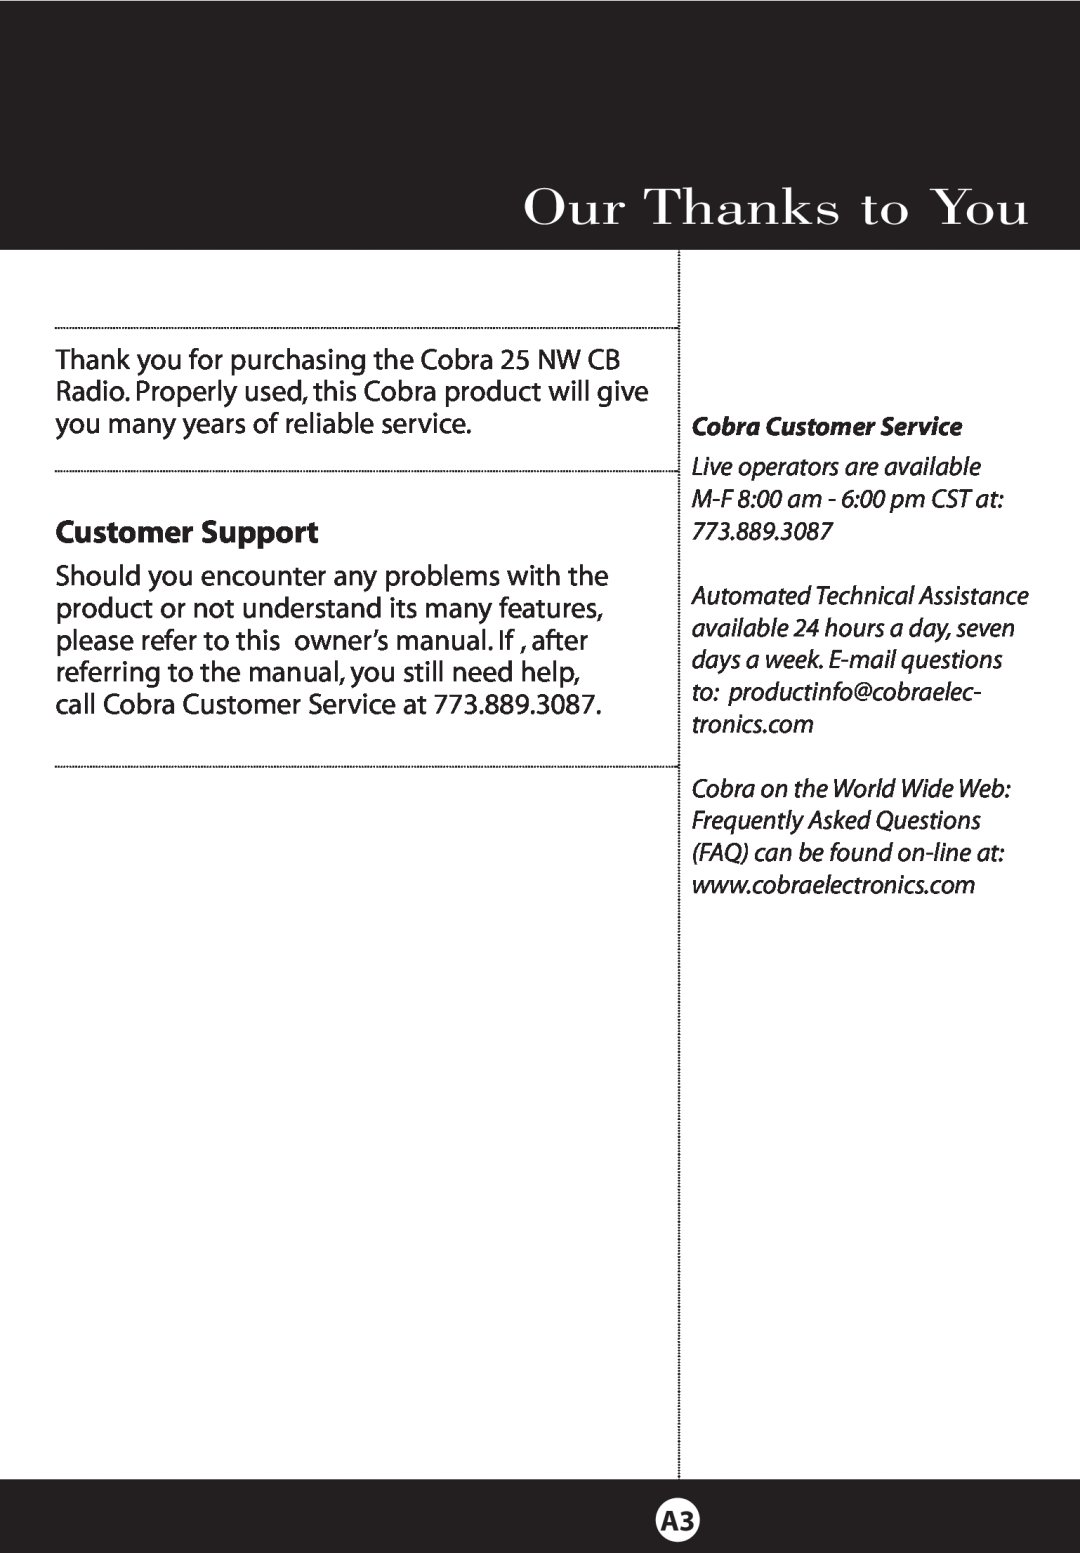 Cobra Electronics 25 NW specifications Our Thanks to You, Customer Support, Cobra Customer Service 